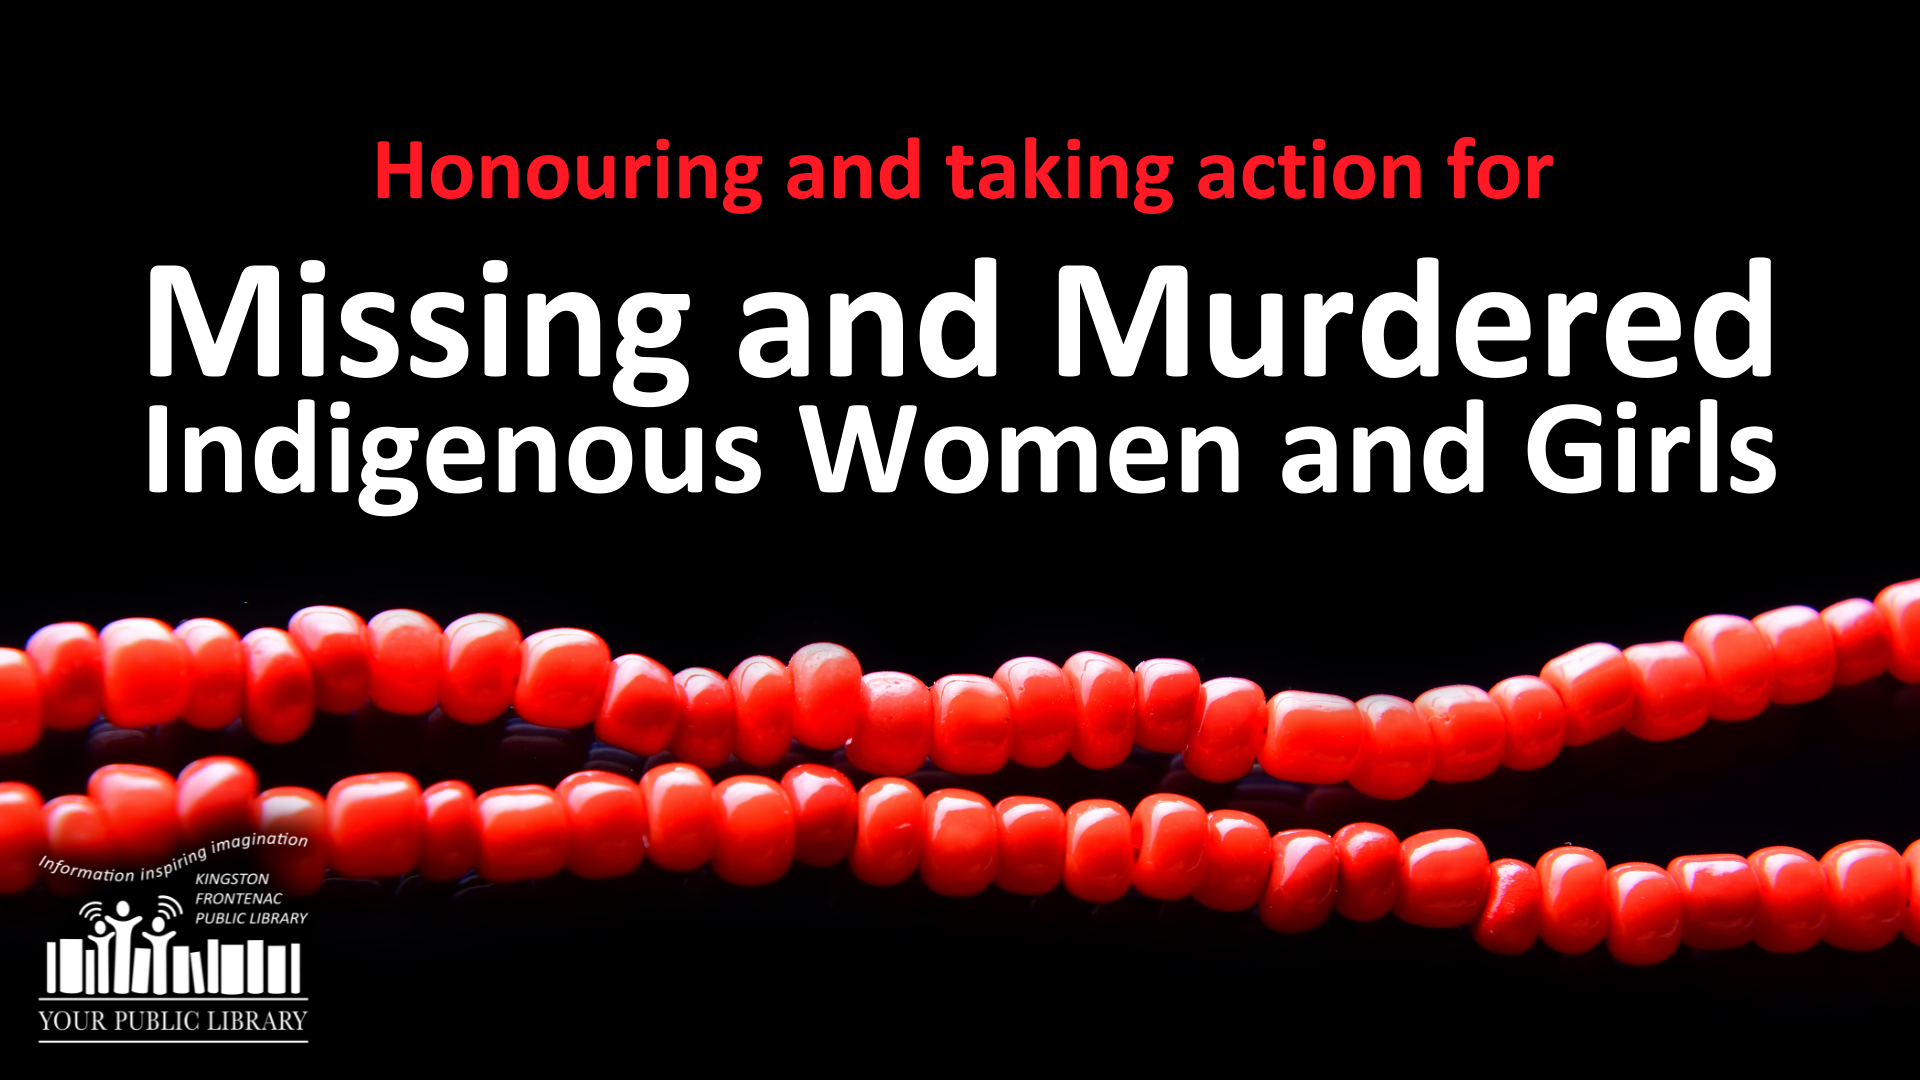 Honouring and taking action for Missing and Murdered Indigenous Women and Girls with red beads.